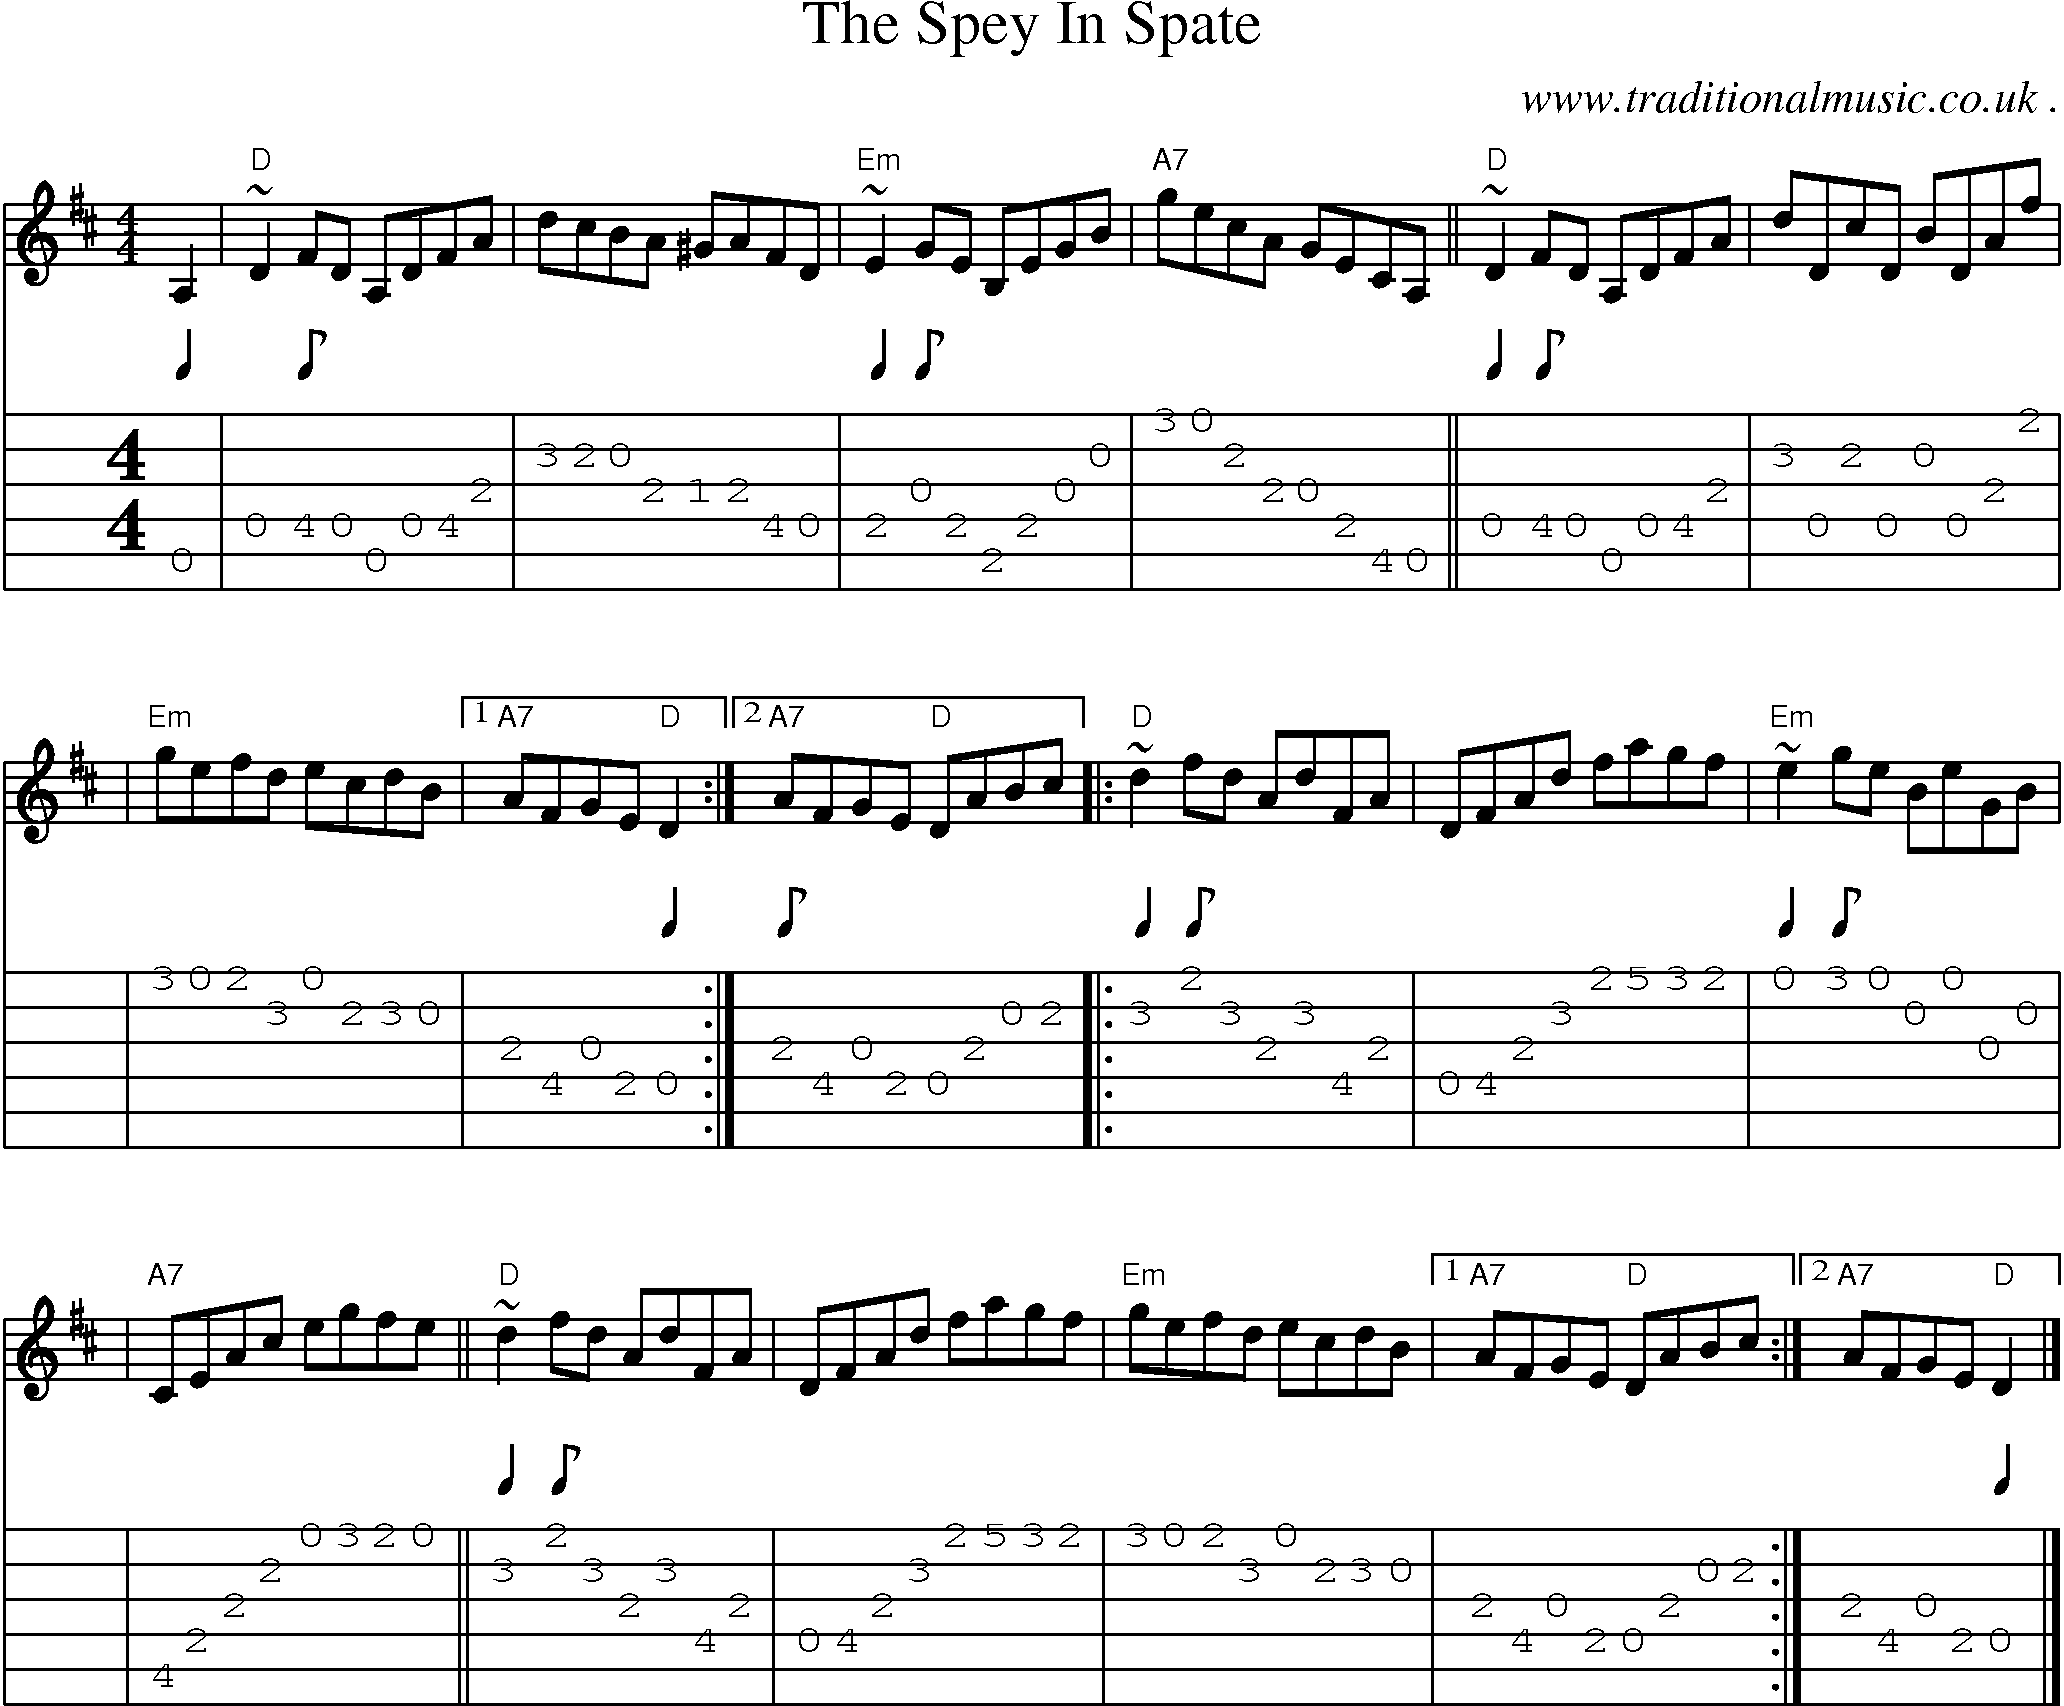 Sheet-music  score, Chords and Guitar Tabs for The Spey In Spate